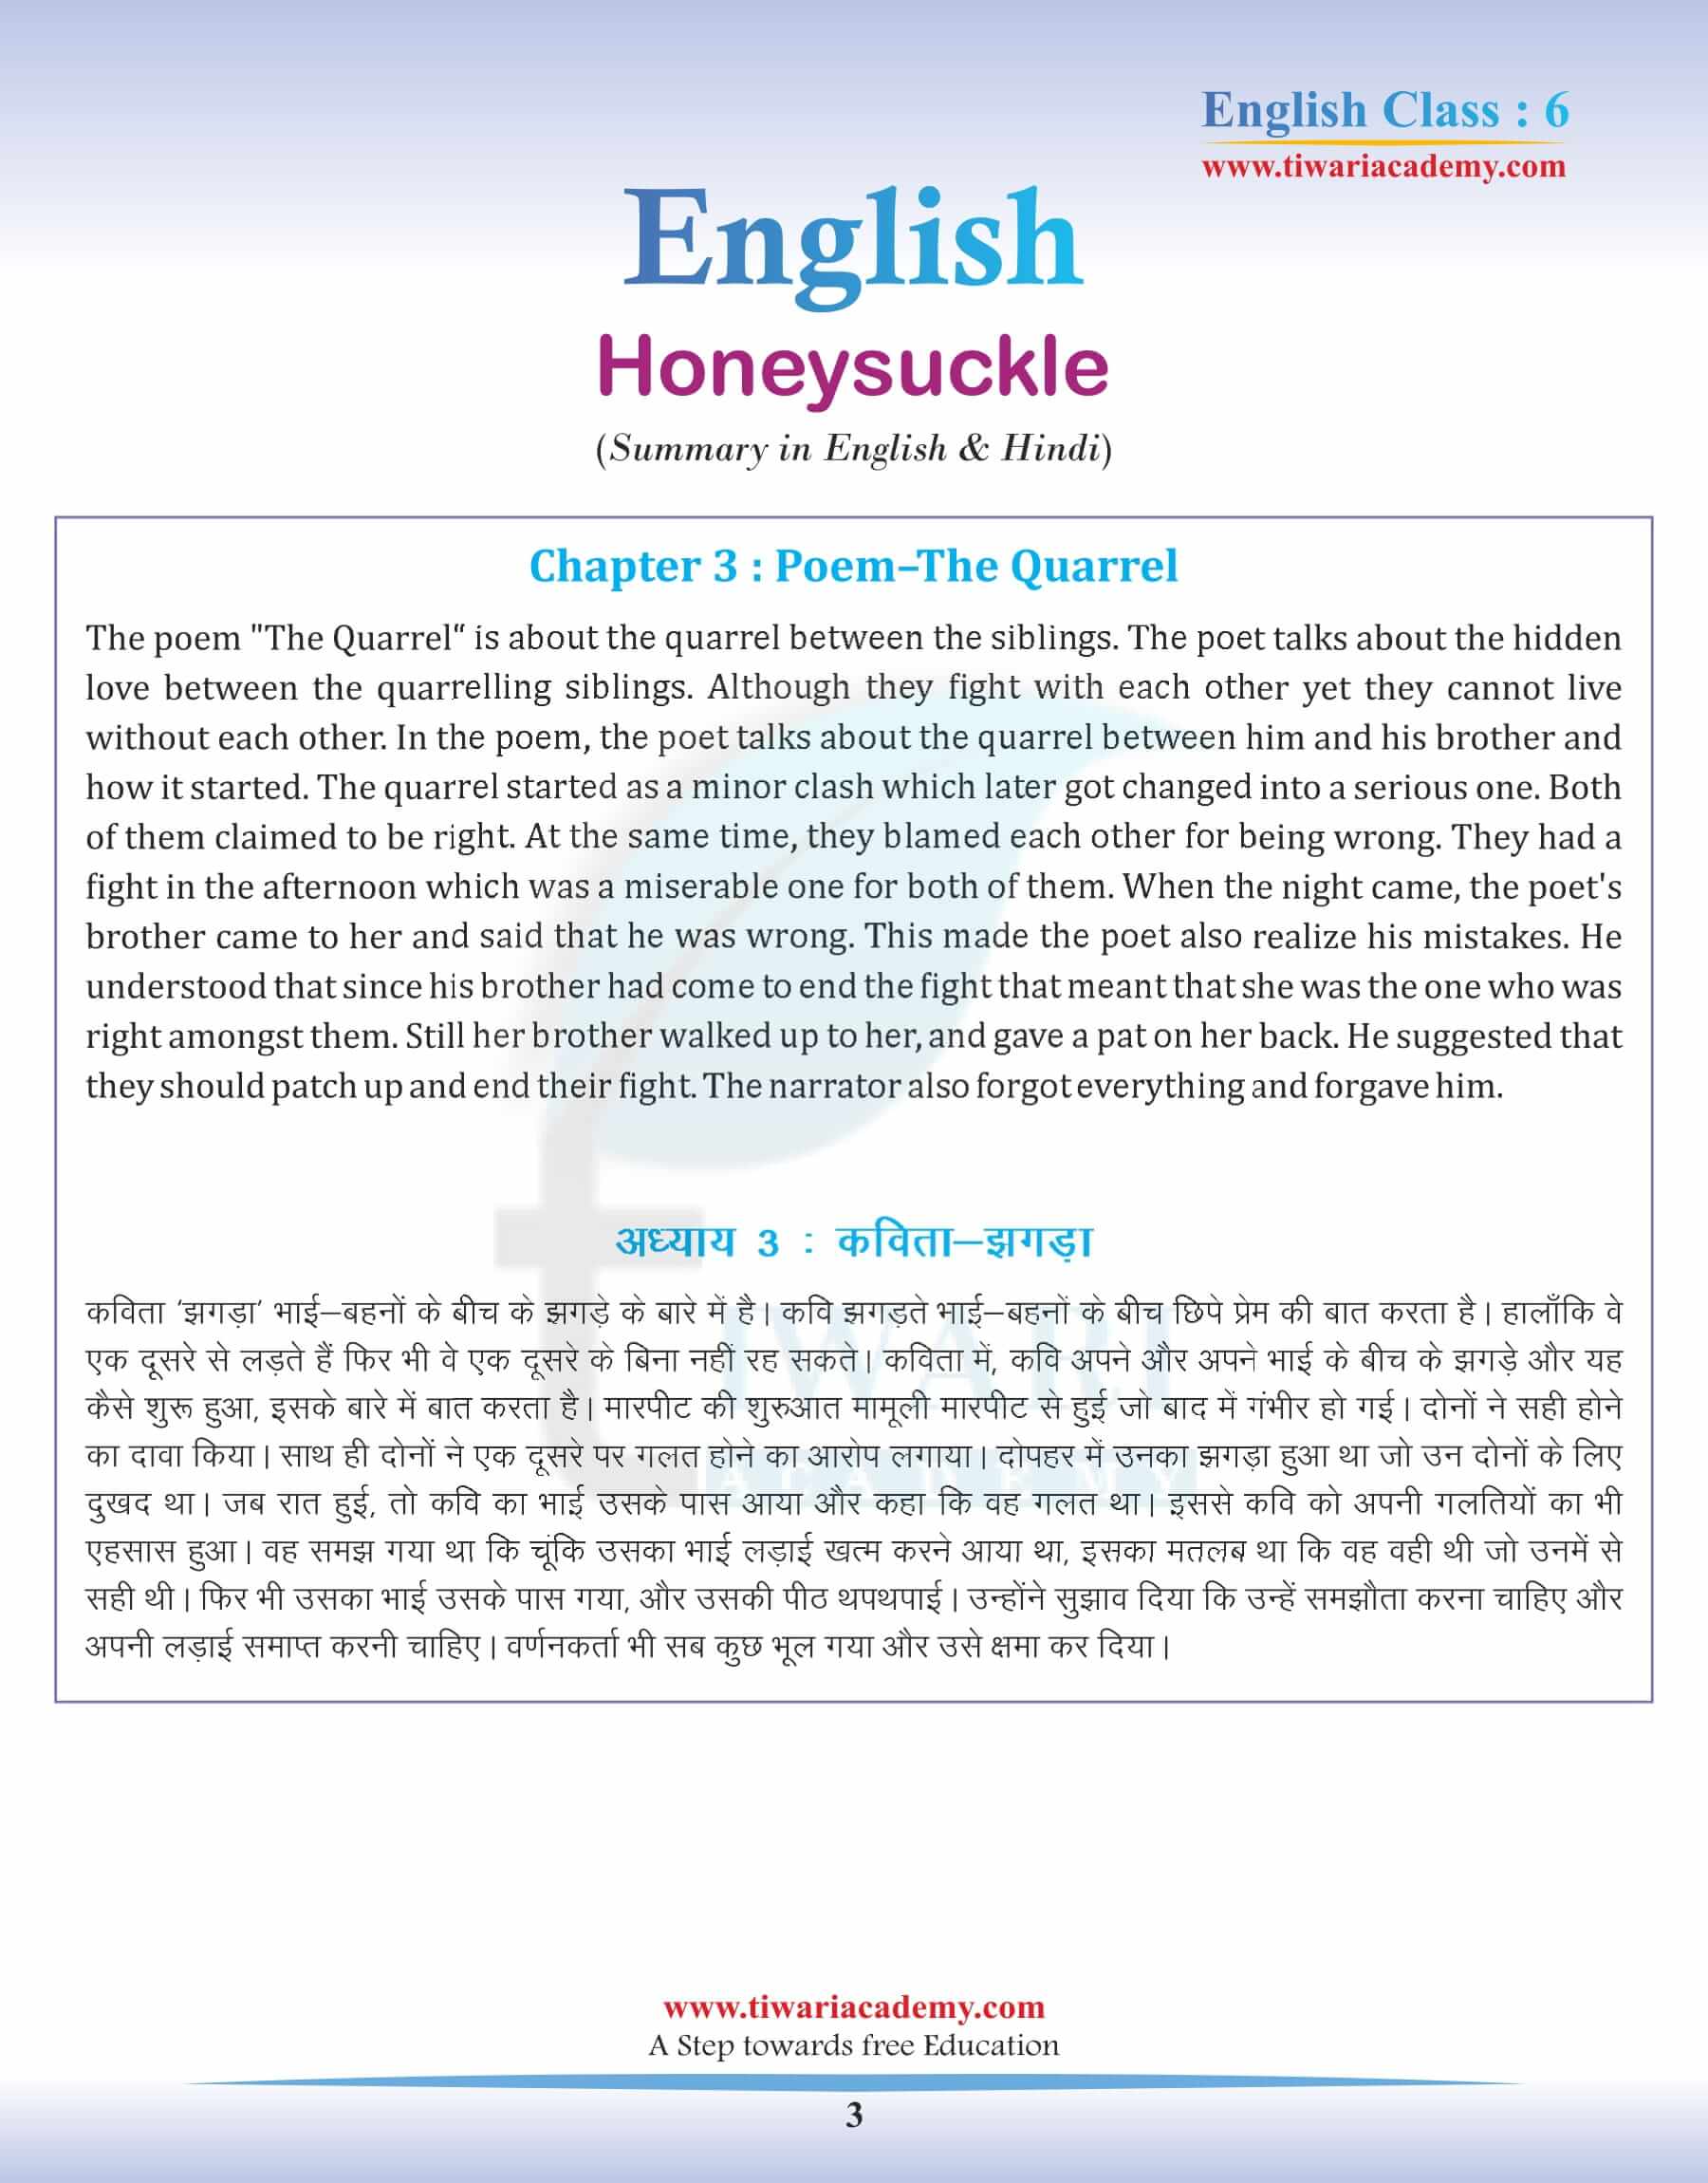 Class 6 English Chapter 3 Summary in Hindi and English